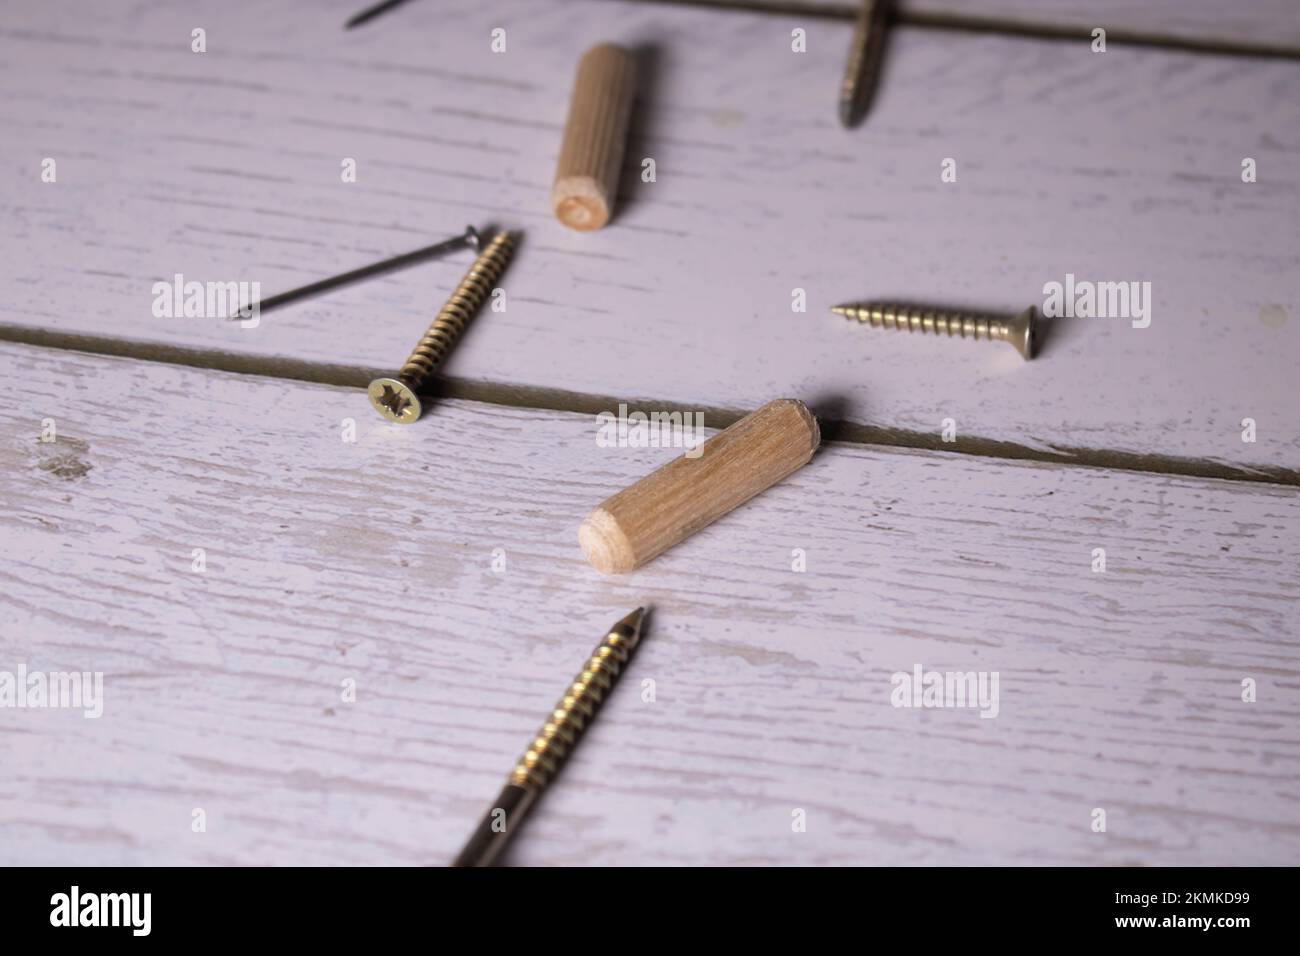 screws self-tapping screws on the background of a screwdriver, a selection of different self-tapping screws for different materials of walls and surfa Stock Photo